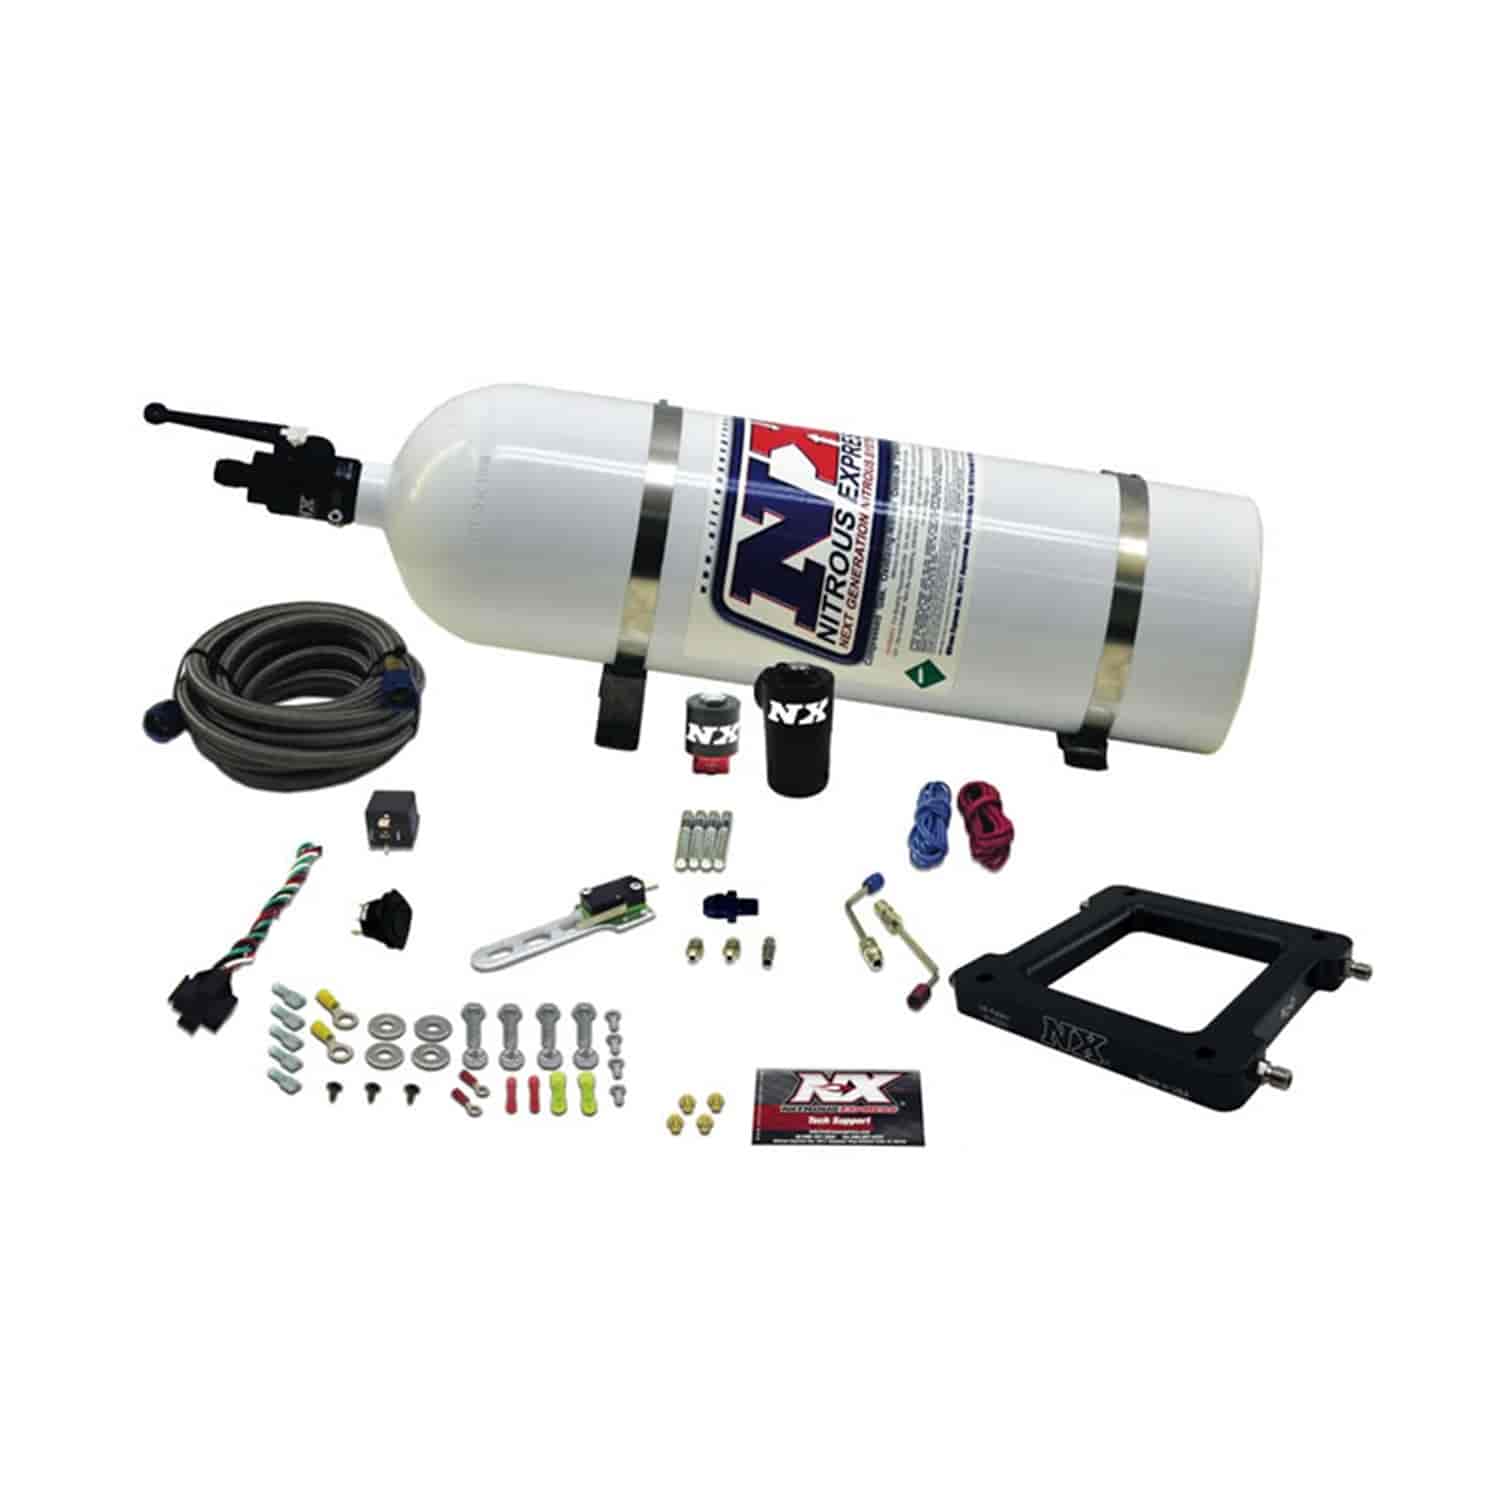 Gemini Restricted Nitrous Class Nitrous System 4500-series Dominator Carb Spray Plate